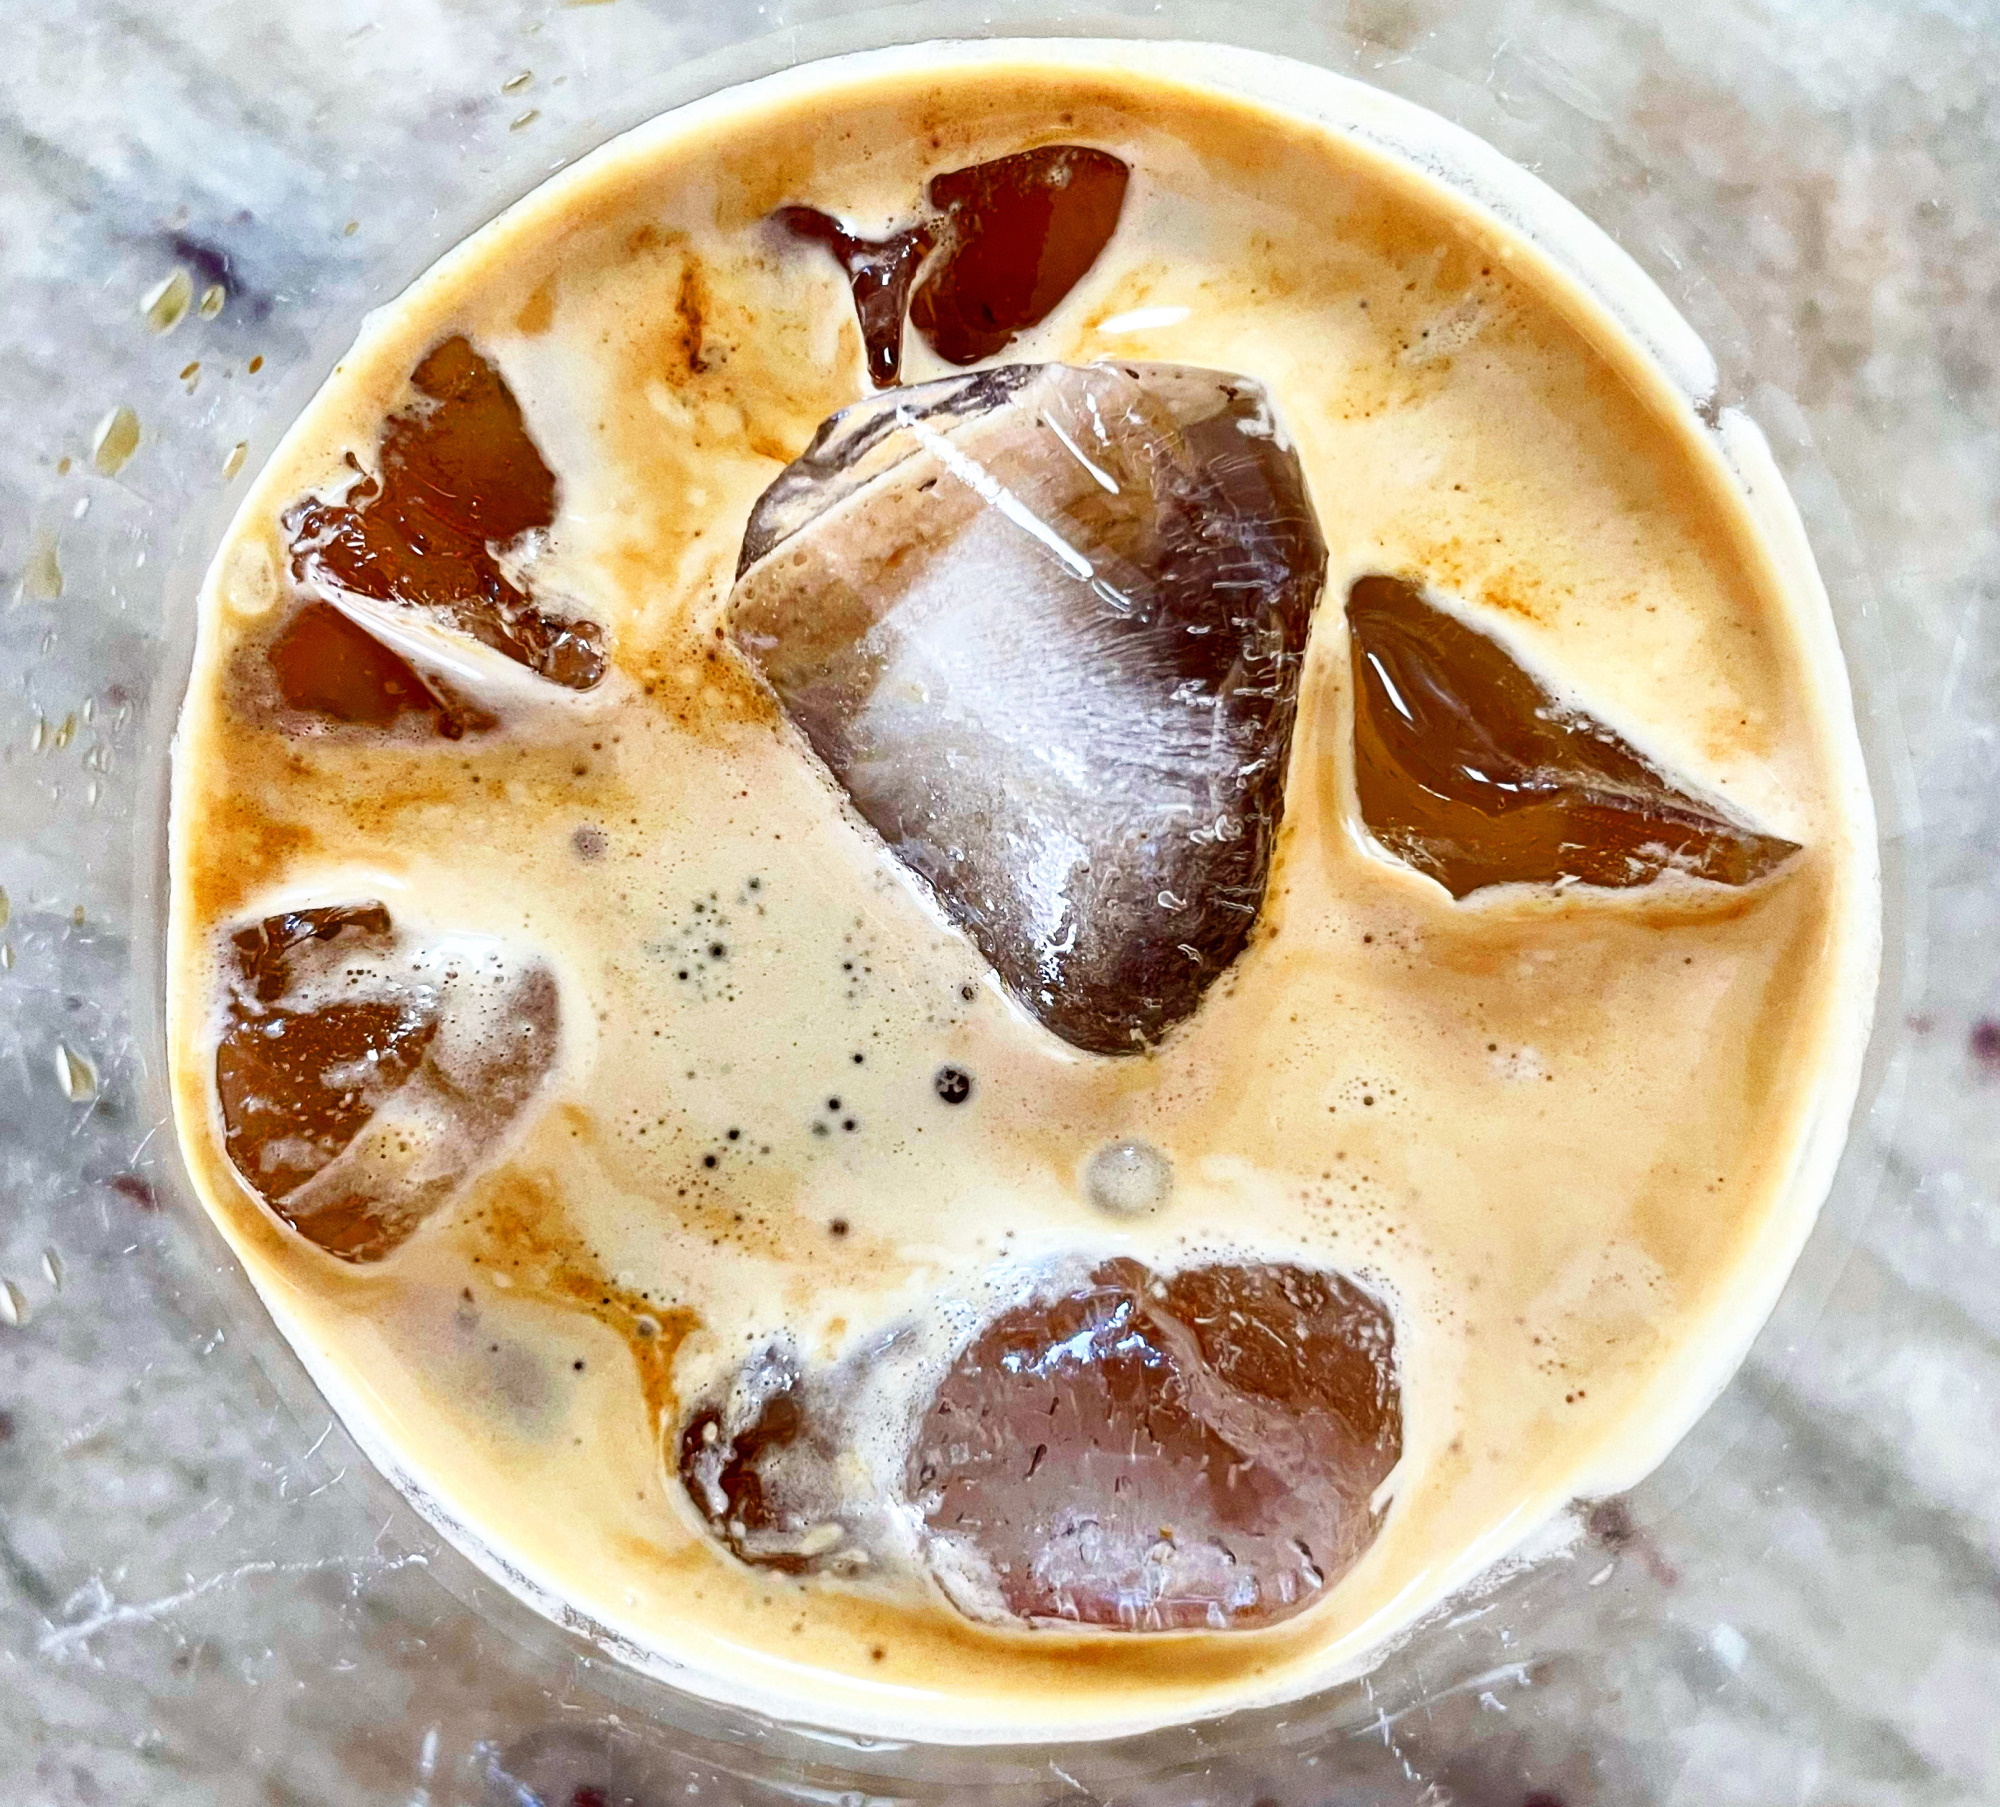 An iced coffee drink made with Osma Pro.